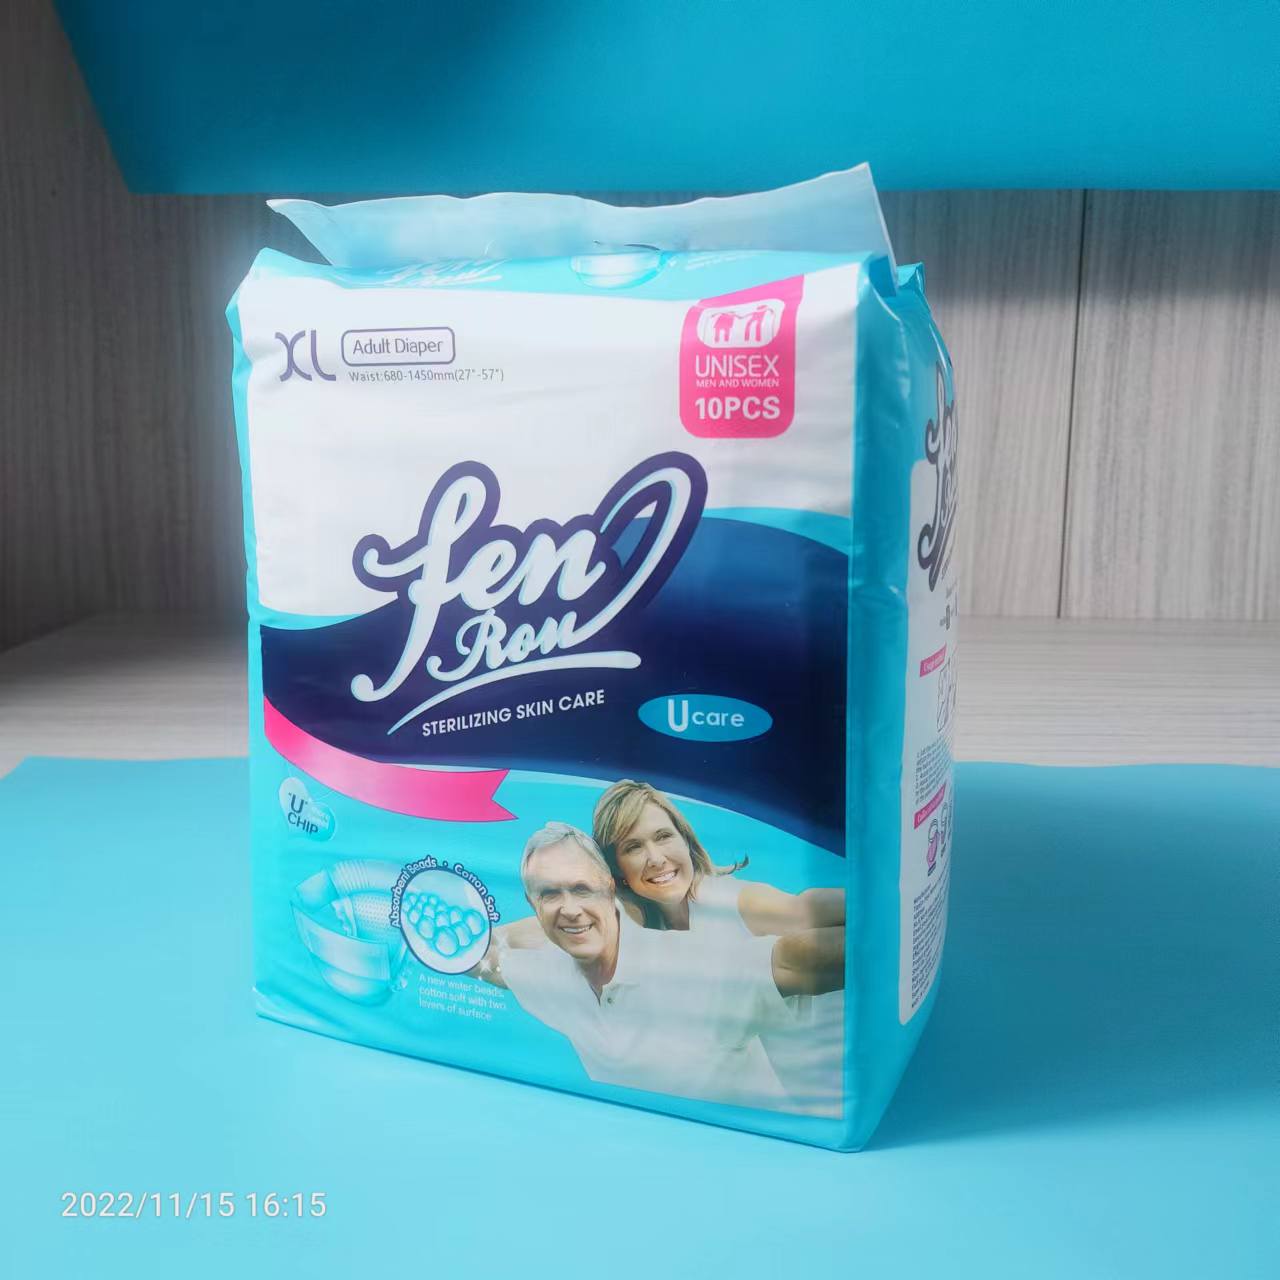 More knowledge about adult diaper and adult pants diaper made in China Manufacture